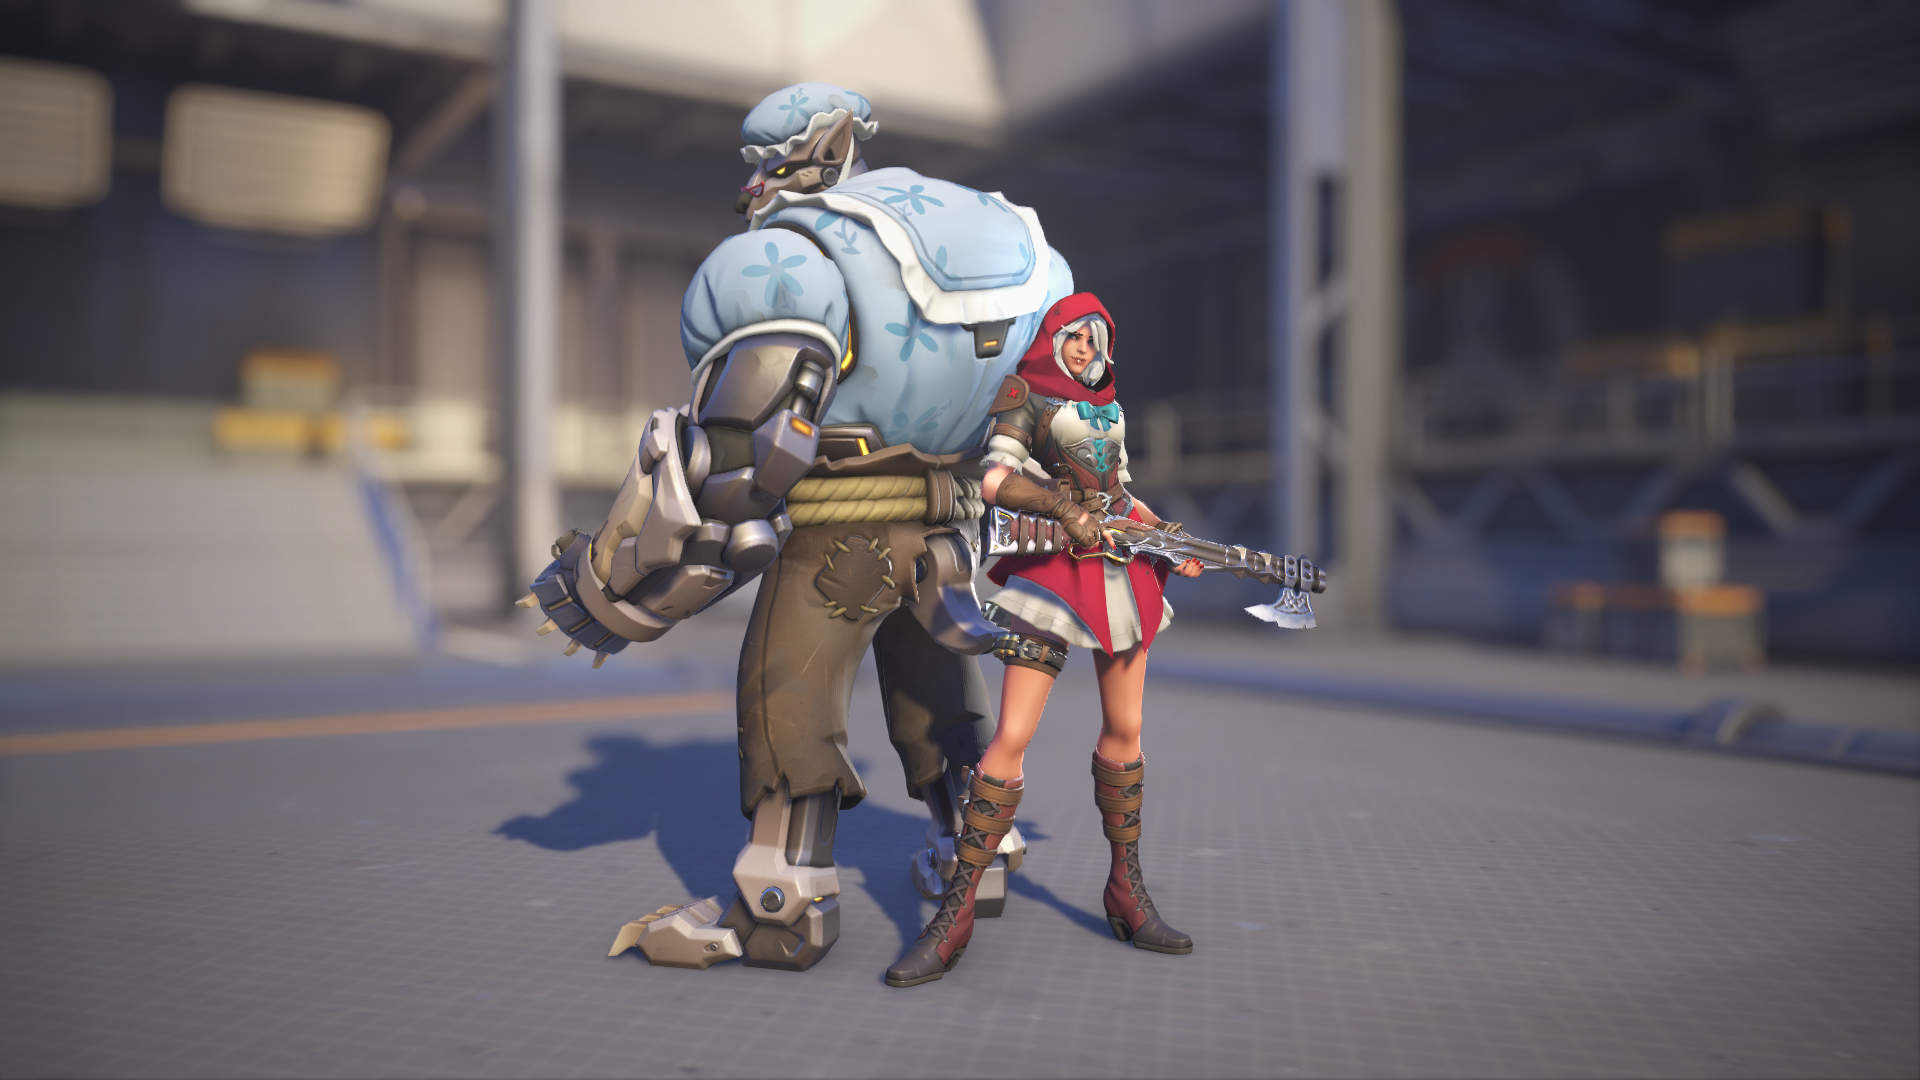 Ashe models her Little Red skin in Overwatch 2.